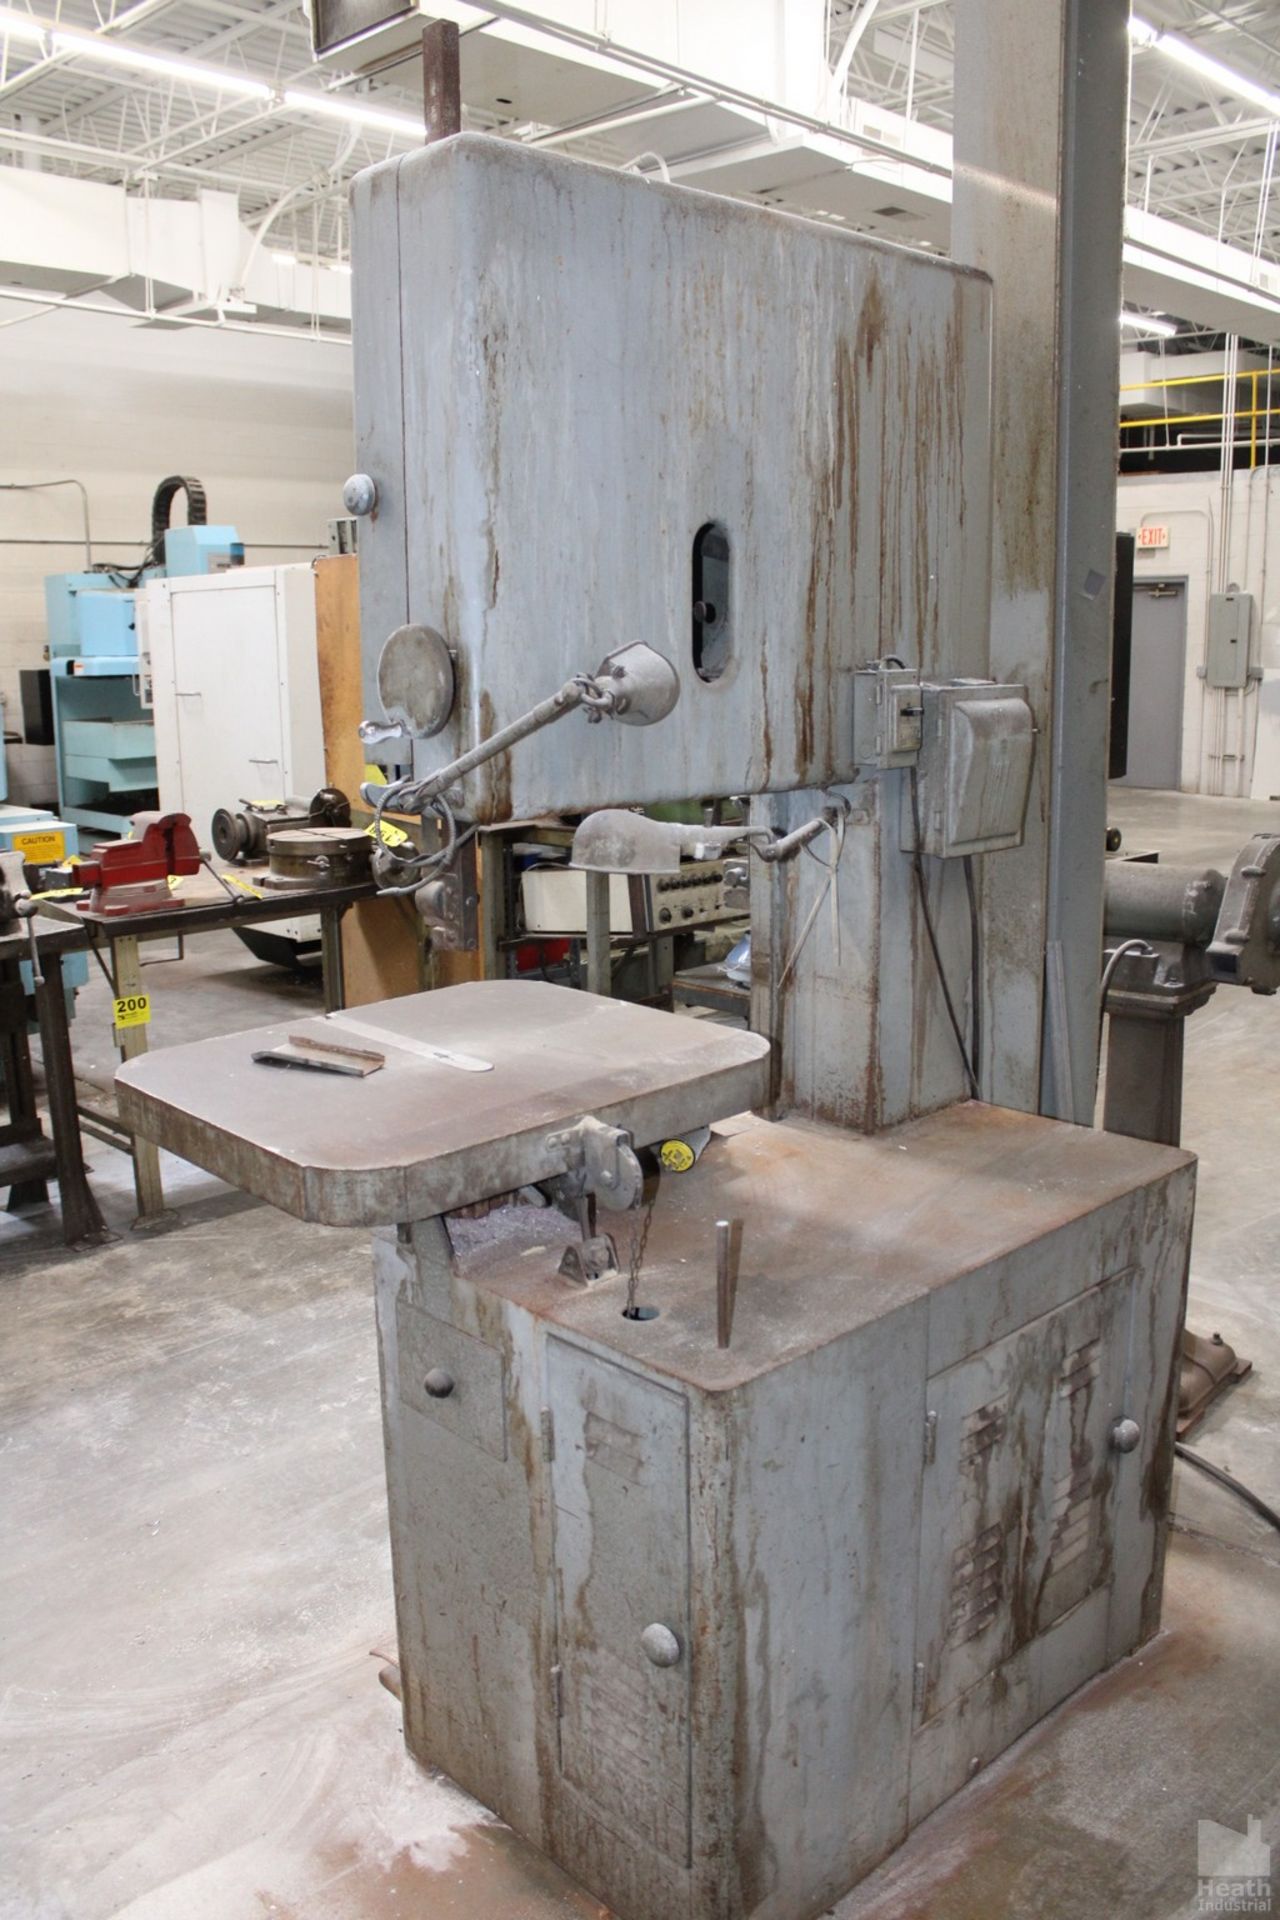 GROB MODEL NS24 24" METAL CUTTING BANDSAW S/N 2148, 28" X 24" TABLE, BLADE WELDER - Image 4 of 4